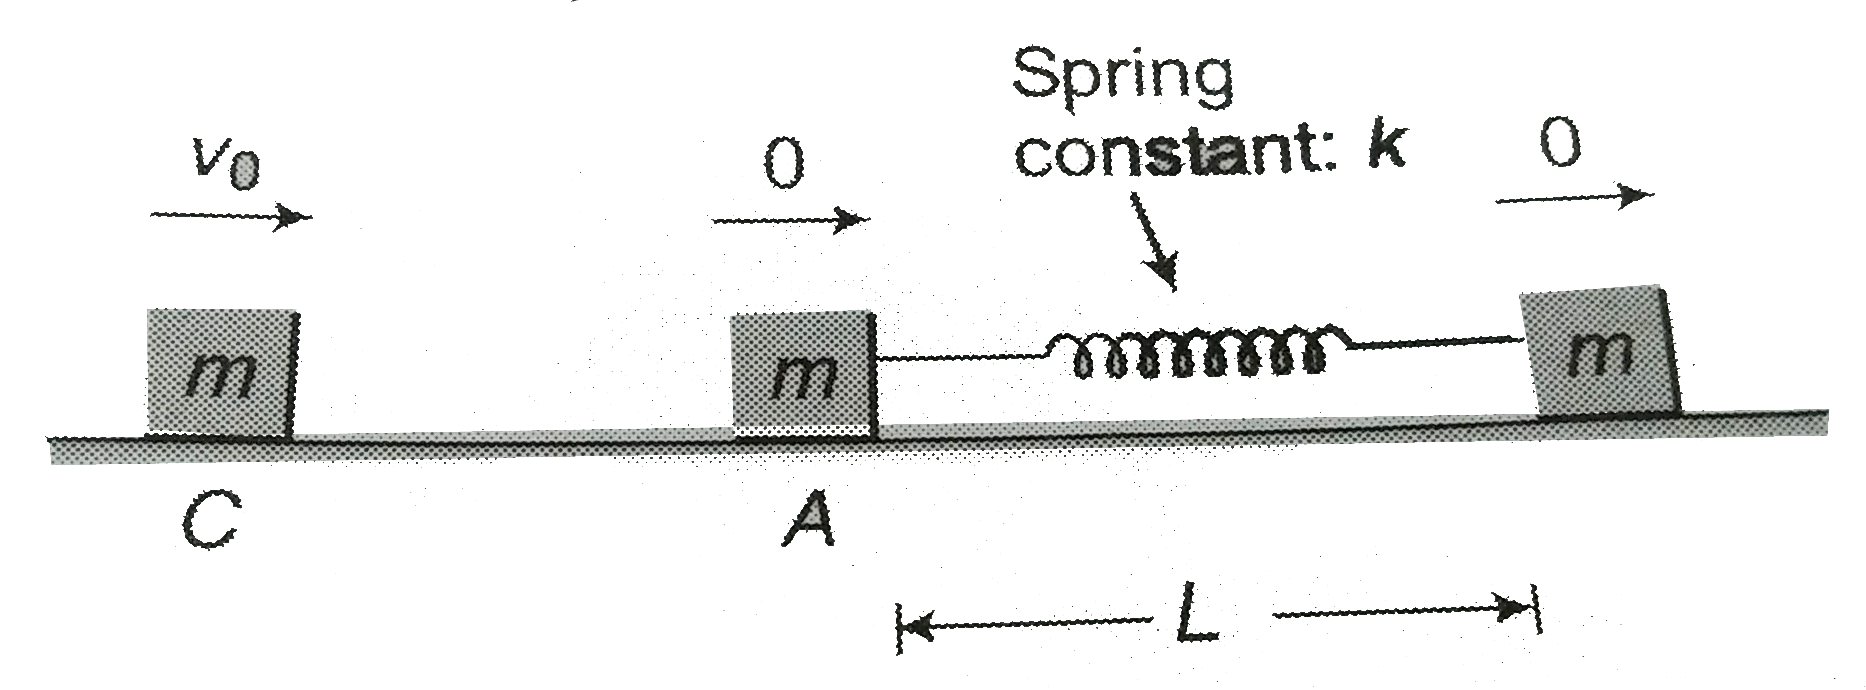 Two blocks A and B of masses m and 2m are connected by a massless spring of natural length L and spring constant k. The blocks are intially resting on a smooth horizontal floor with the spring at its natural length , as shown . A third identical block C of mass m moves on the floor with a speed v(0) along the line joining A and B and collides elastically with A. FInd (a) the velocity of c.m. of system (block A + B + spri ng) and (b) the minimum compression of spring.